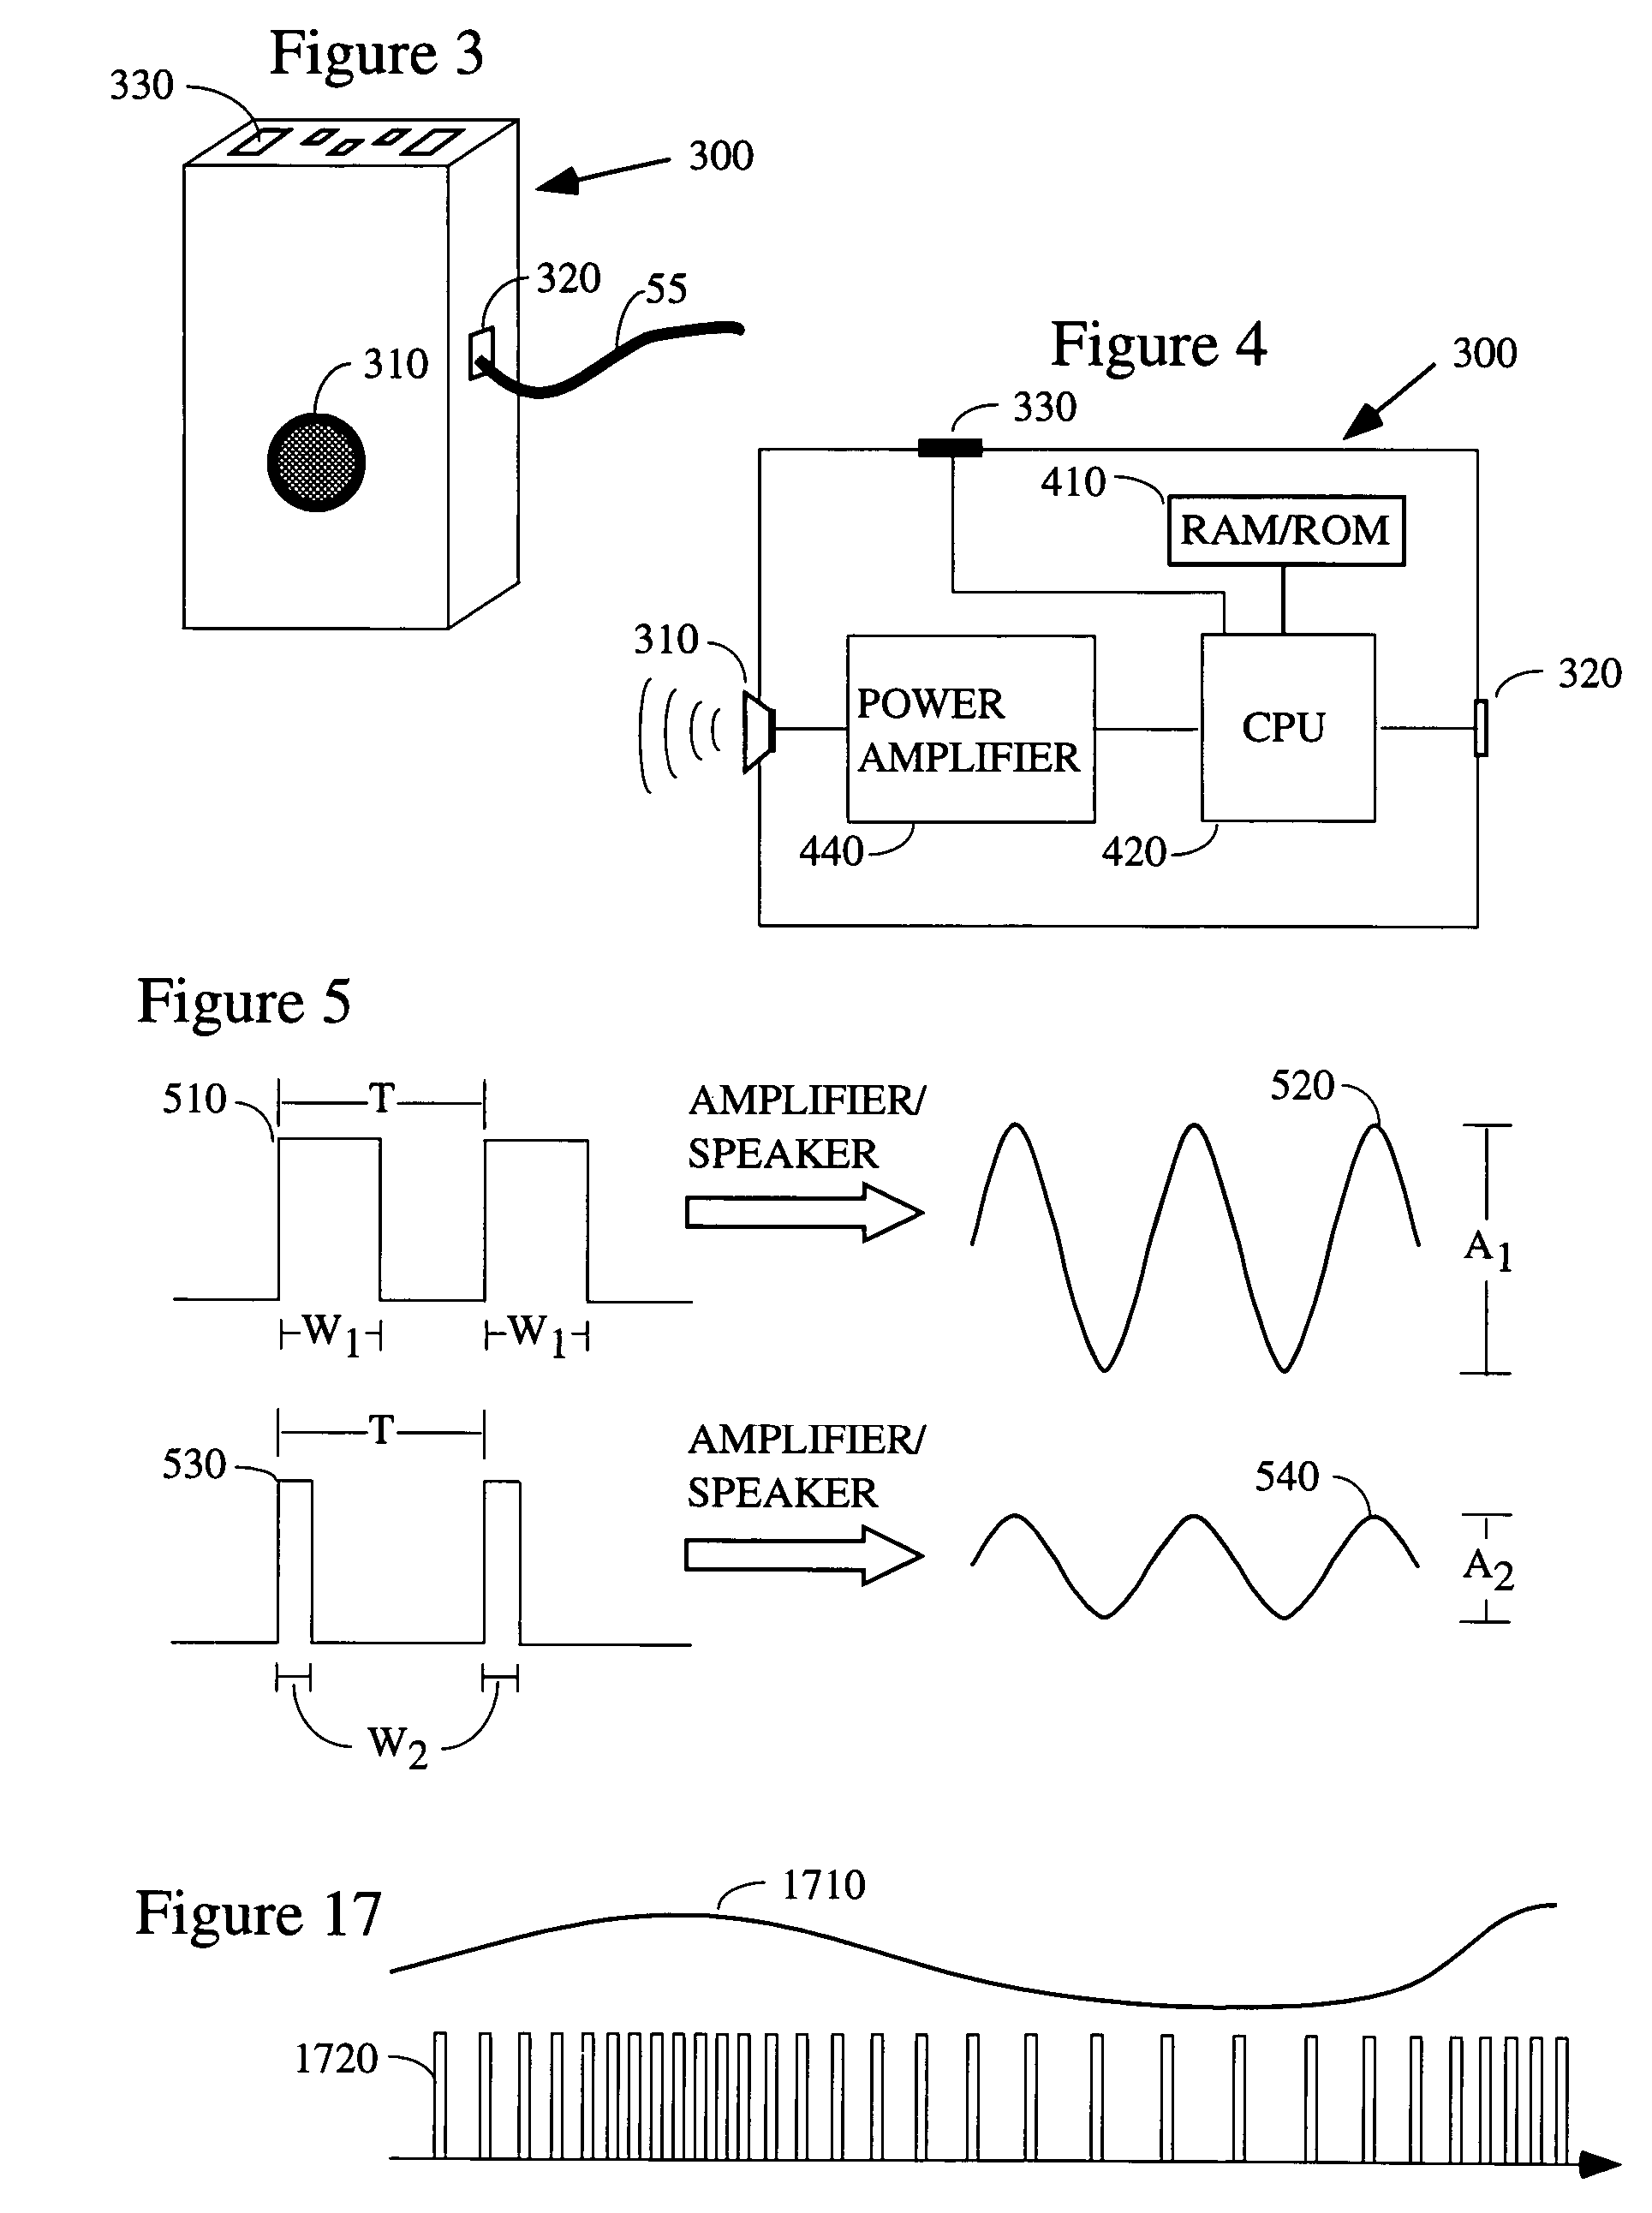 Method and apparatus for alarm volume control using pulse width modulation